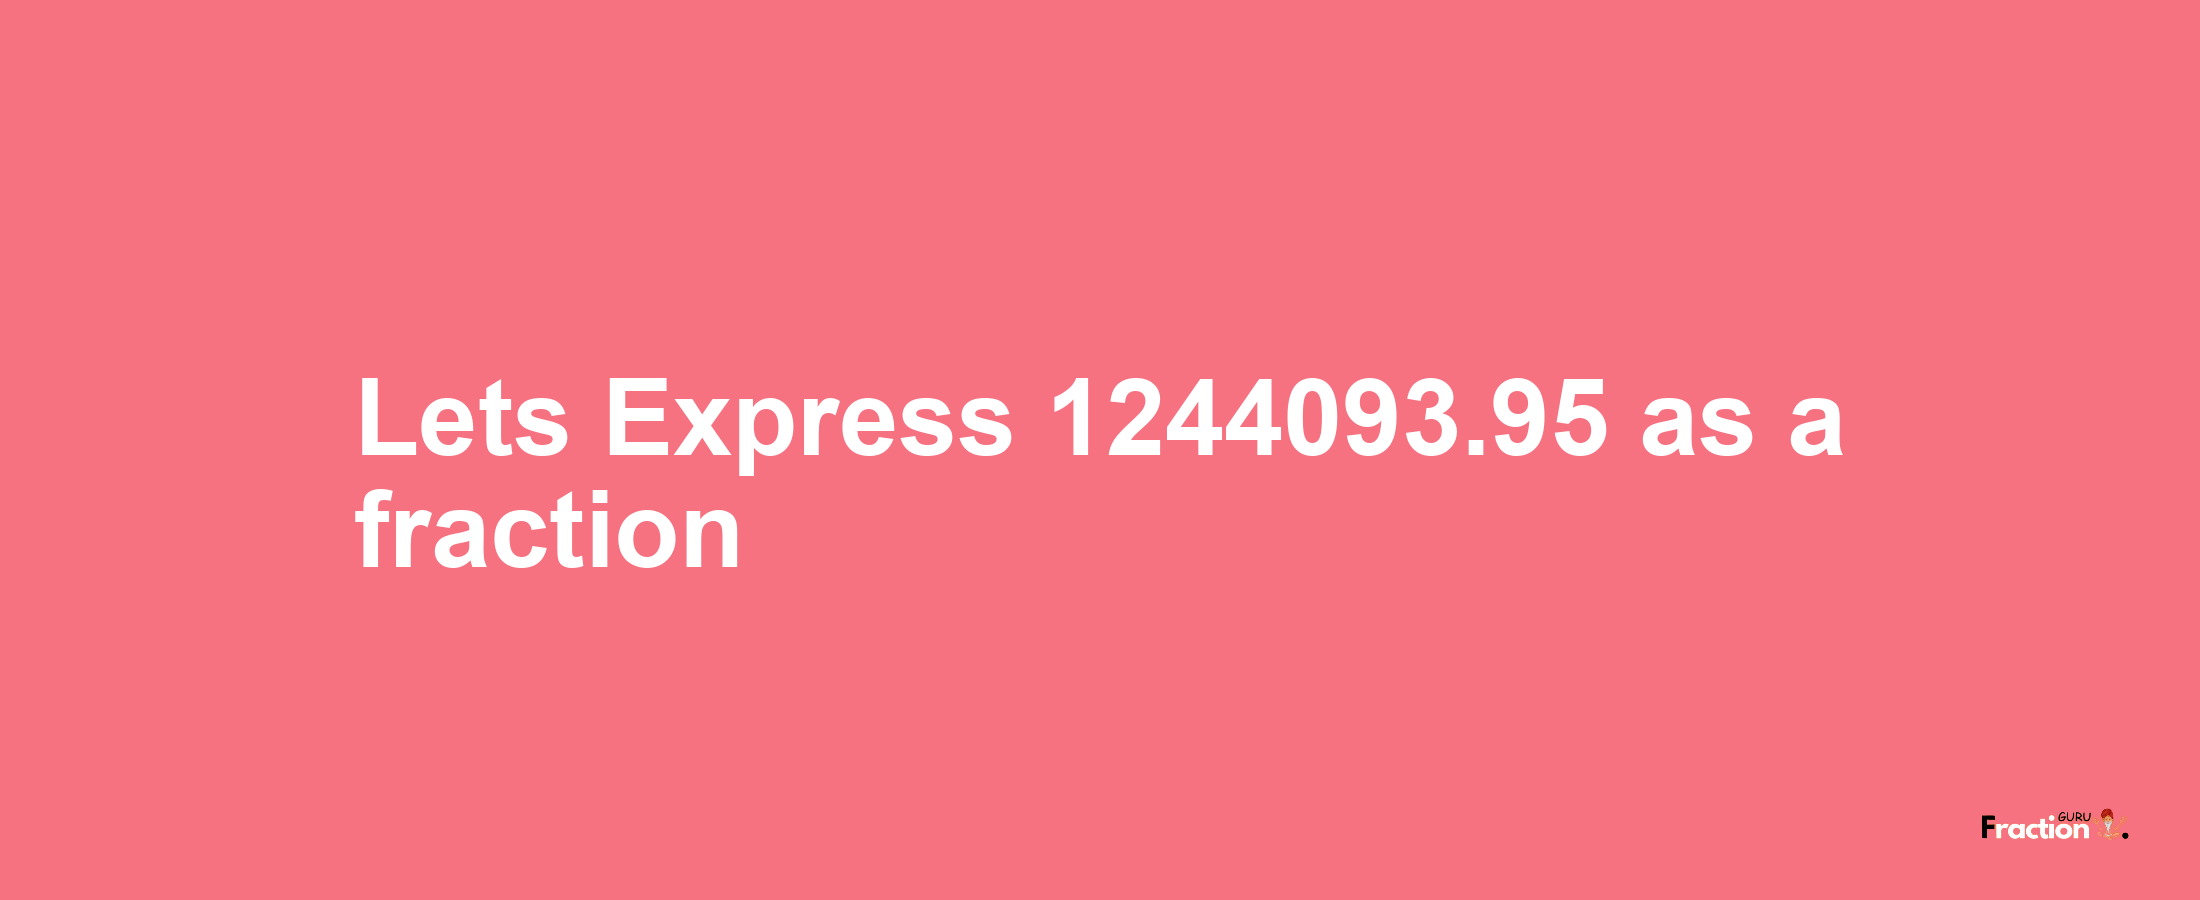 Lets Express 1244093.95 as afraction